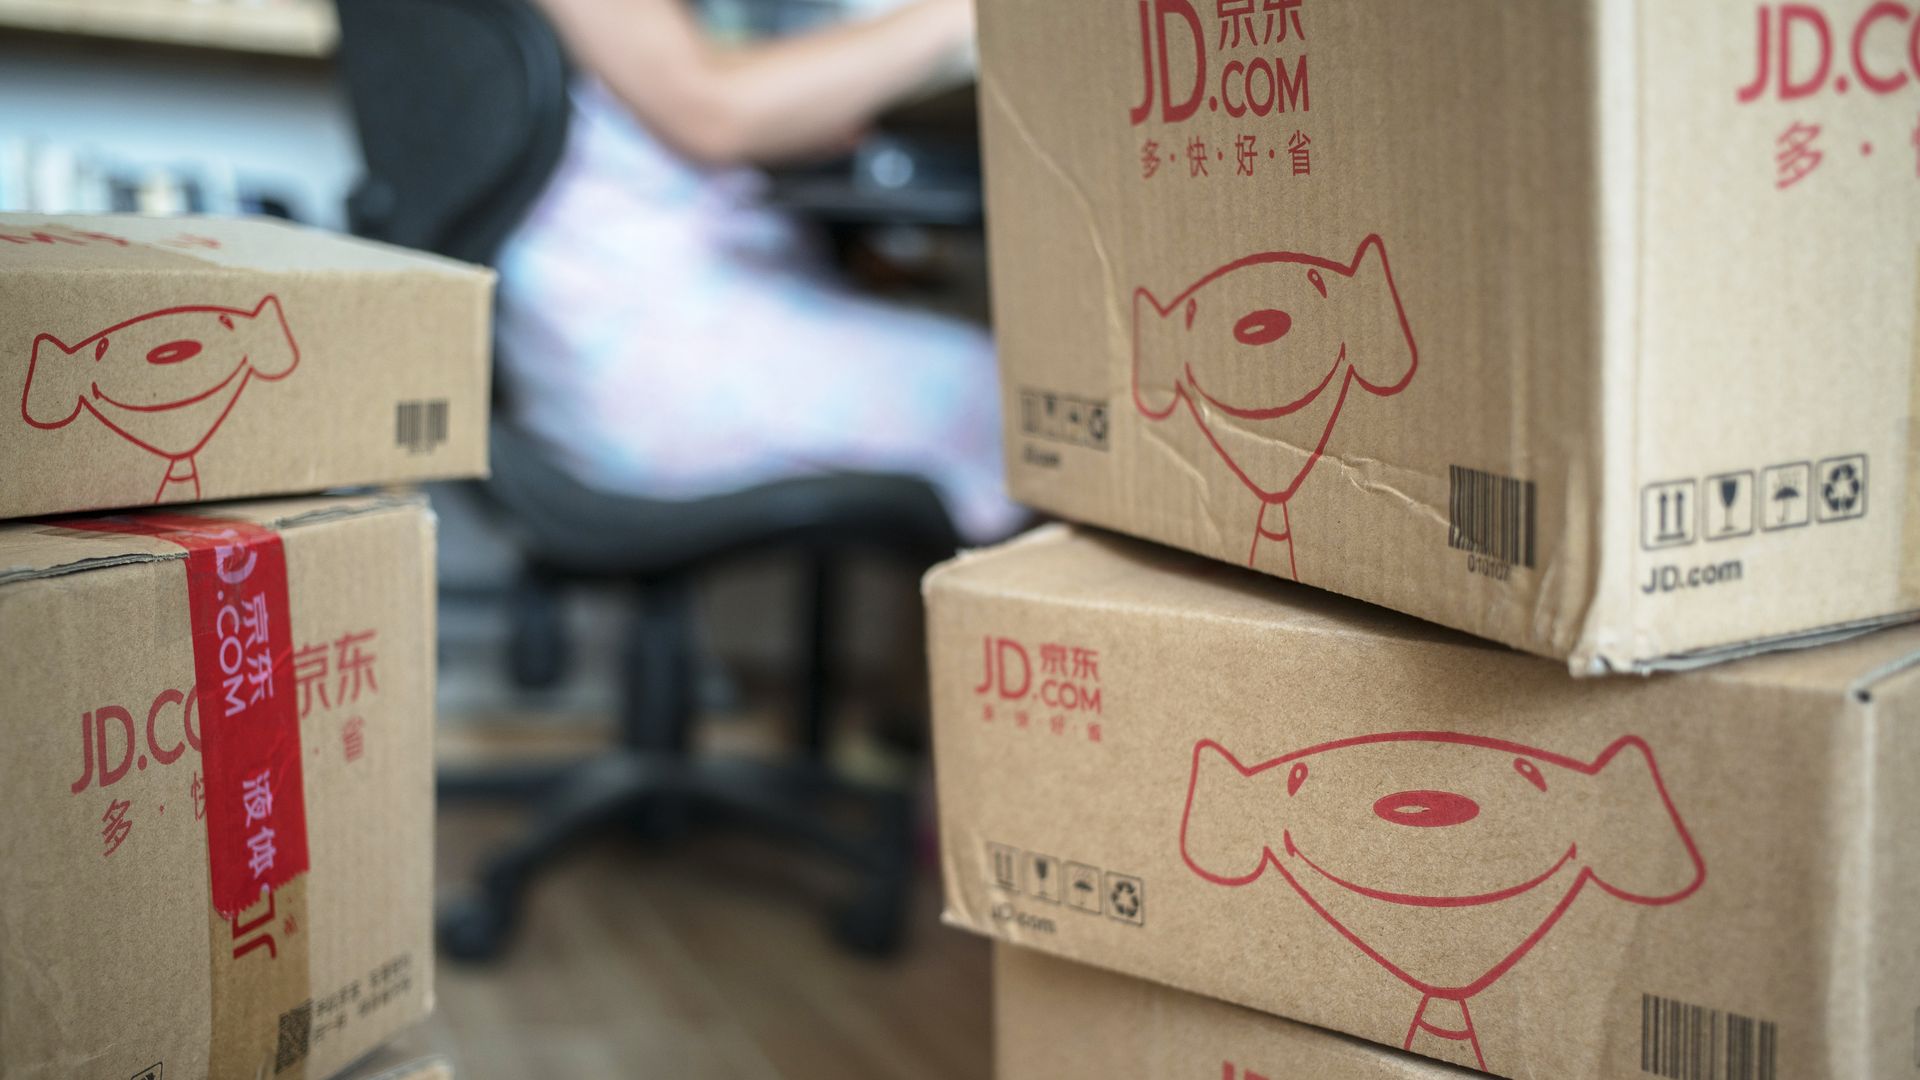 Boxes that say "JD.com" on them. 